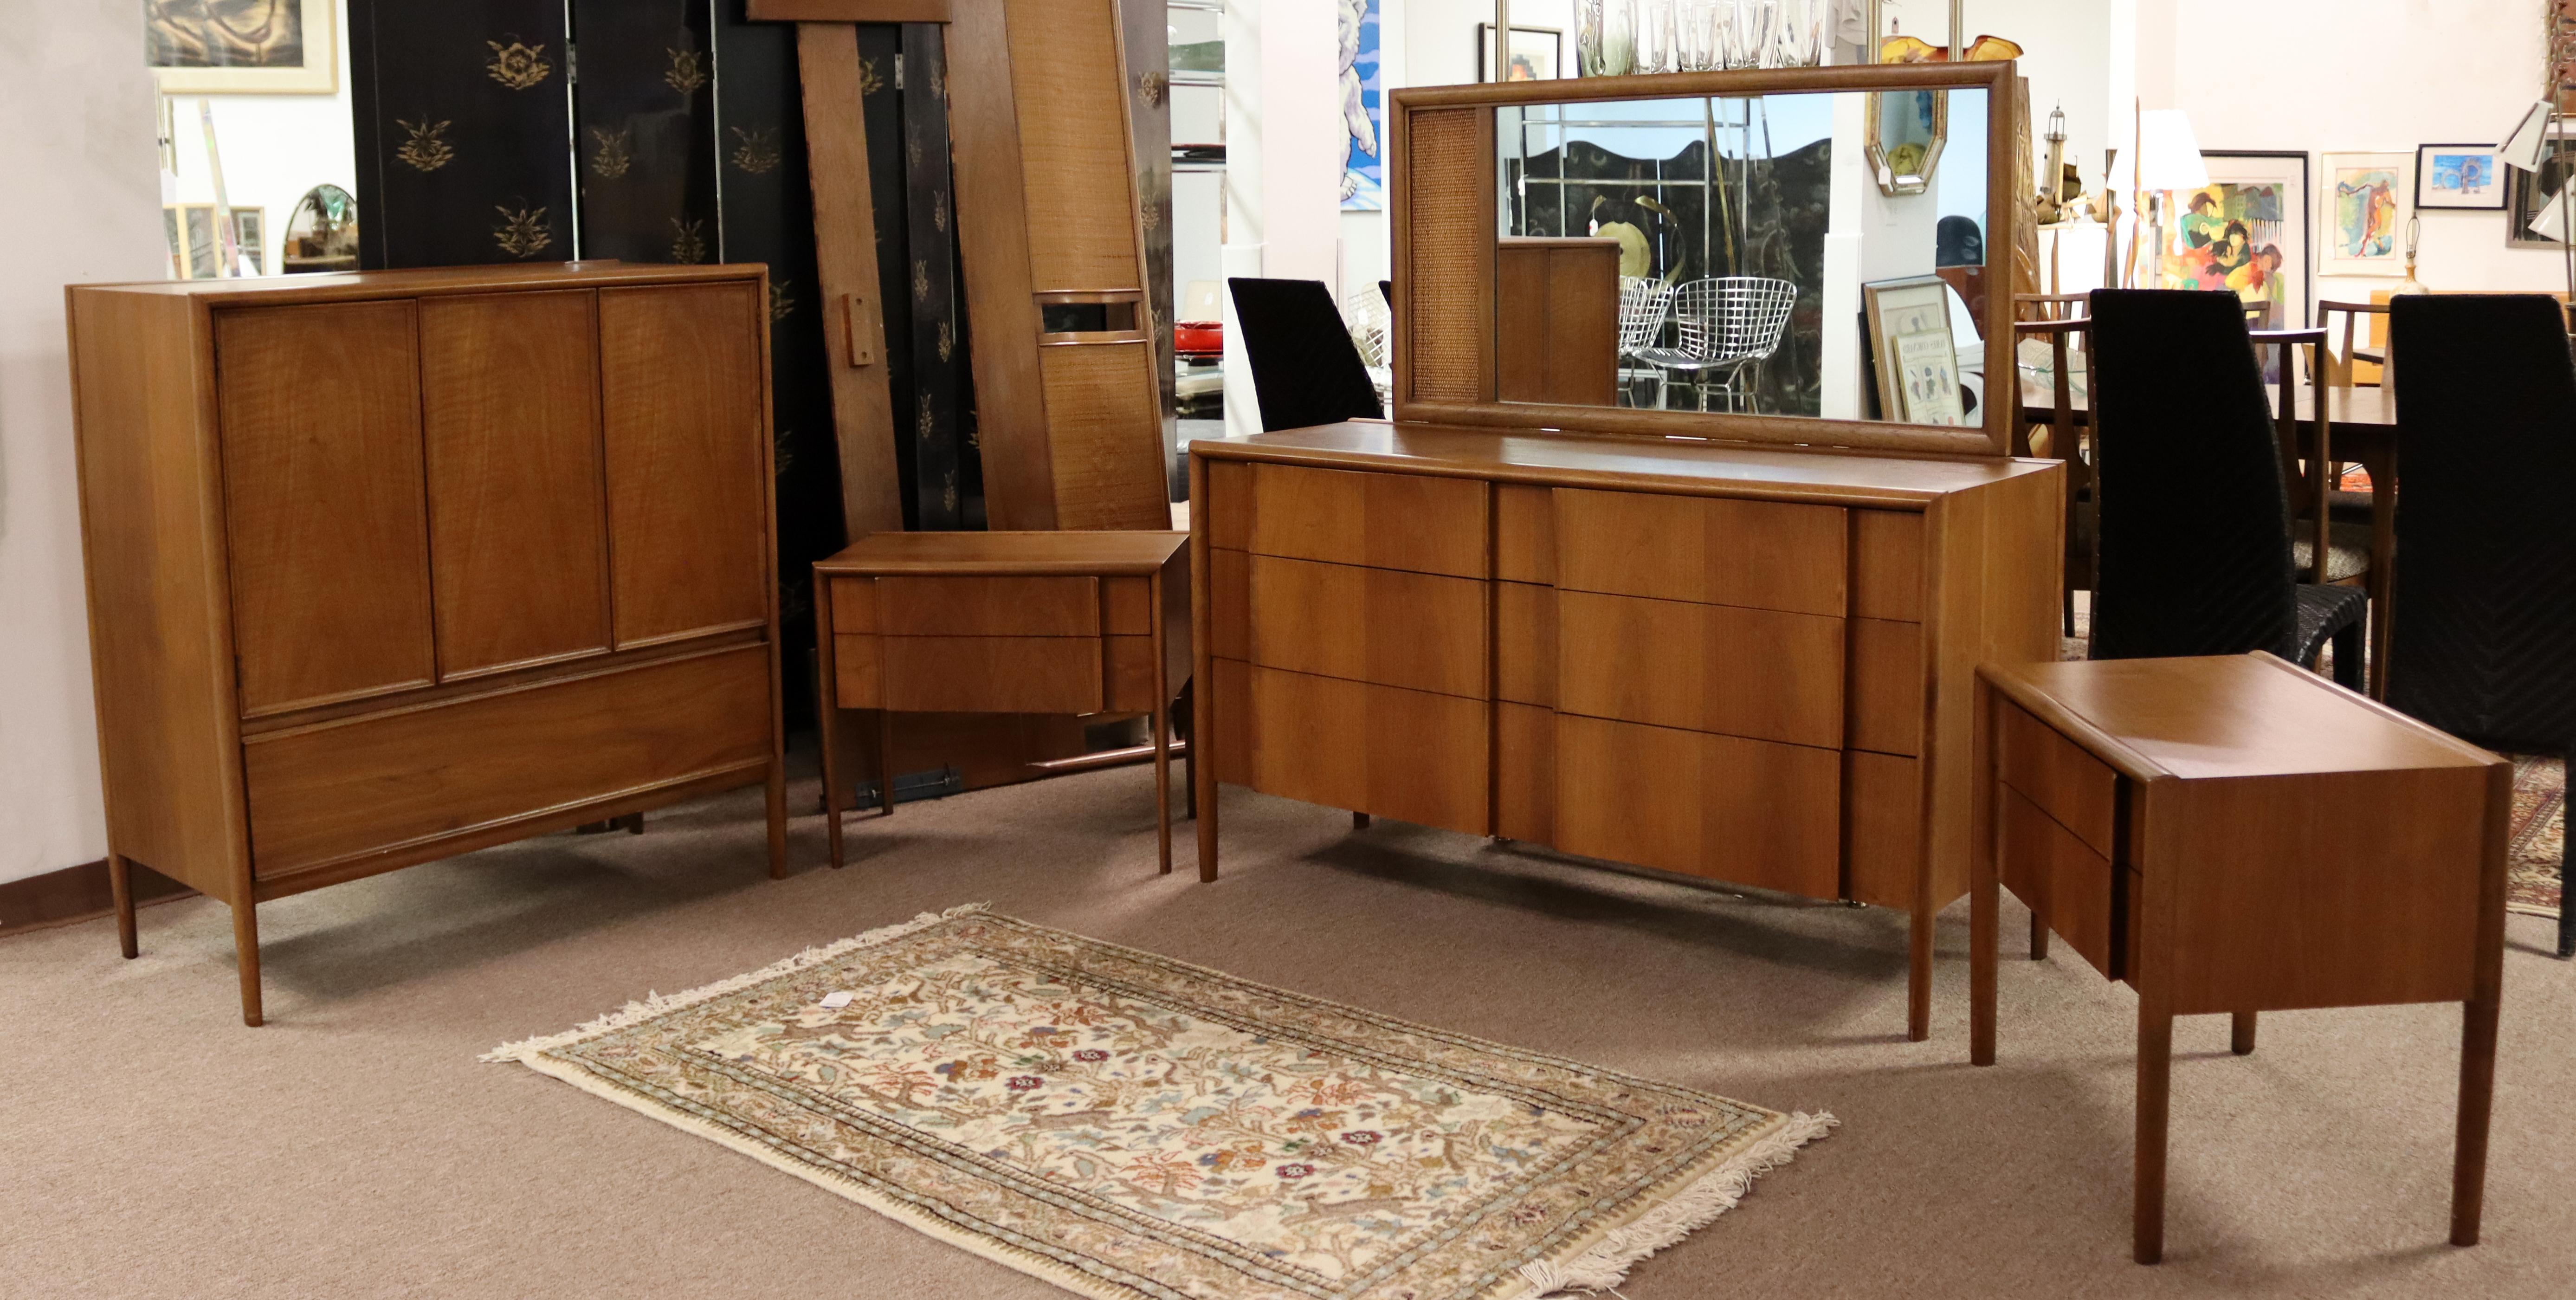 For your consideration is a desirable, walnut bedroom set; including a highboy dresser with with nine drawers, a pair of nightstands, a mirror, a lowboy dresser with six drawers and a headboard for a King sized bed, by Barney Flagg for Drexel's